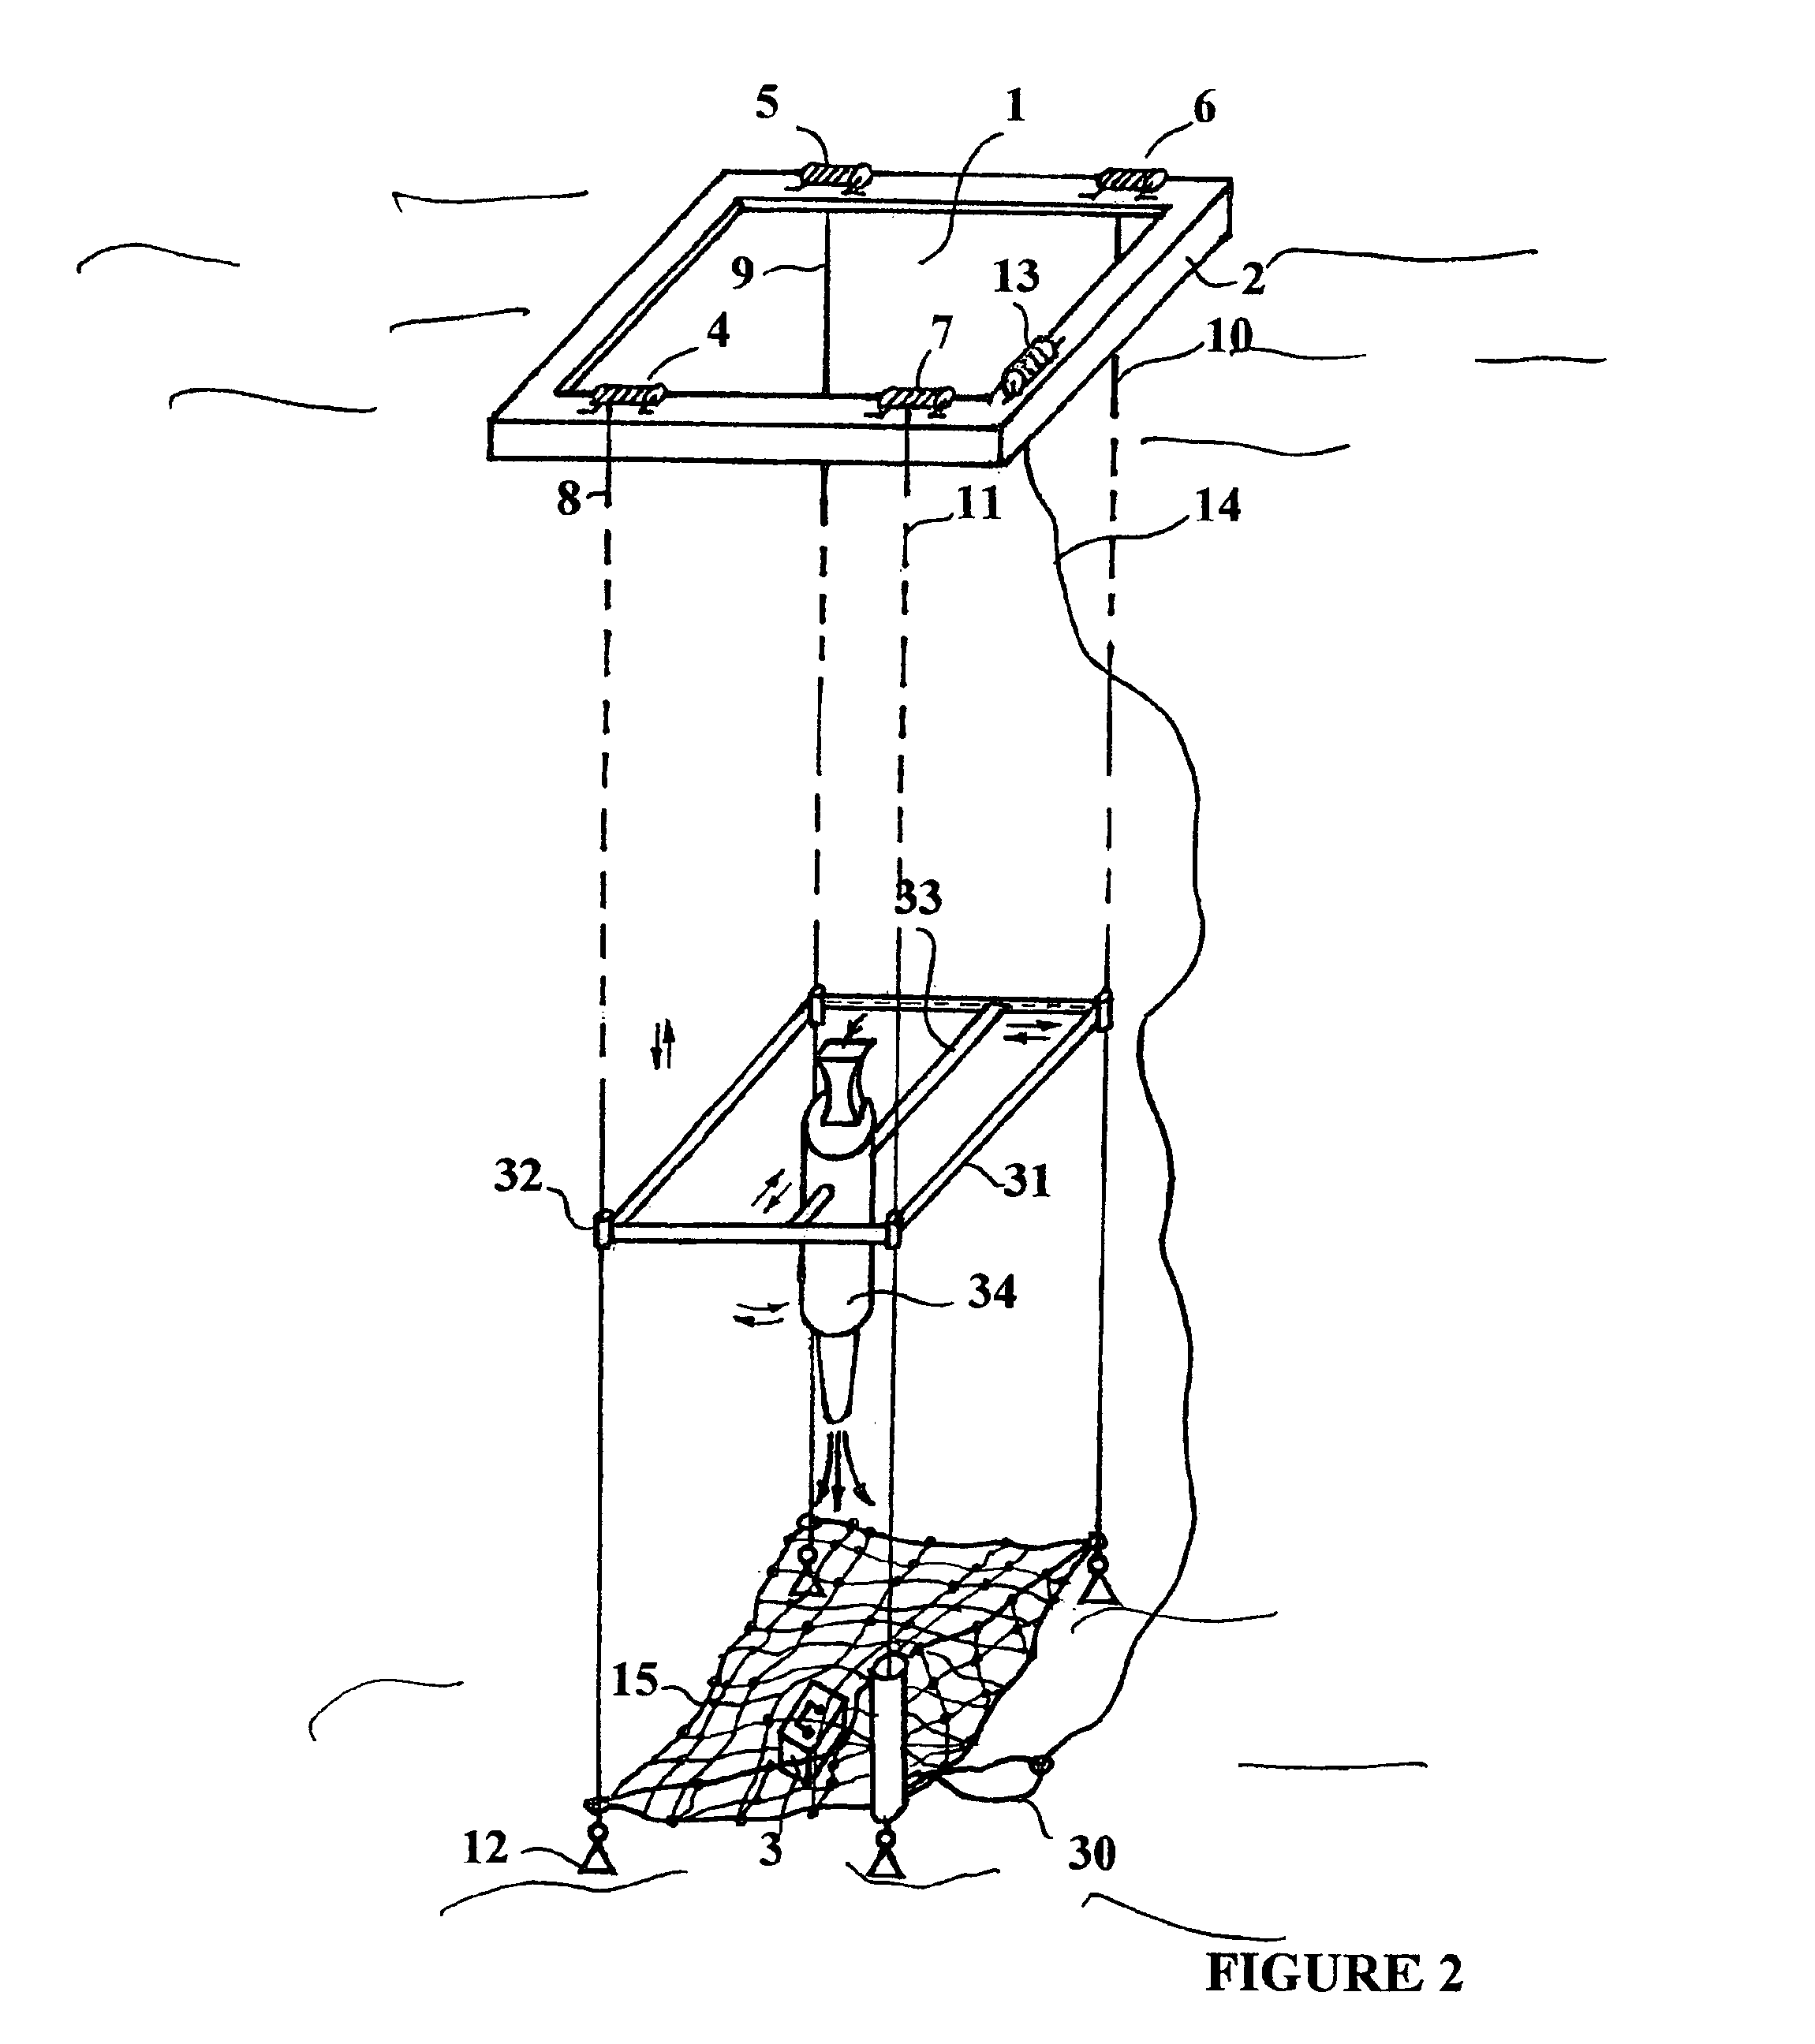 Device and method for raising sunken objects